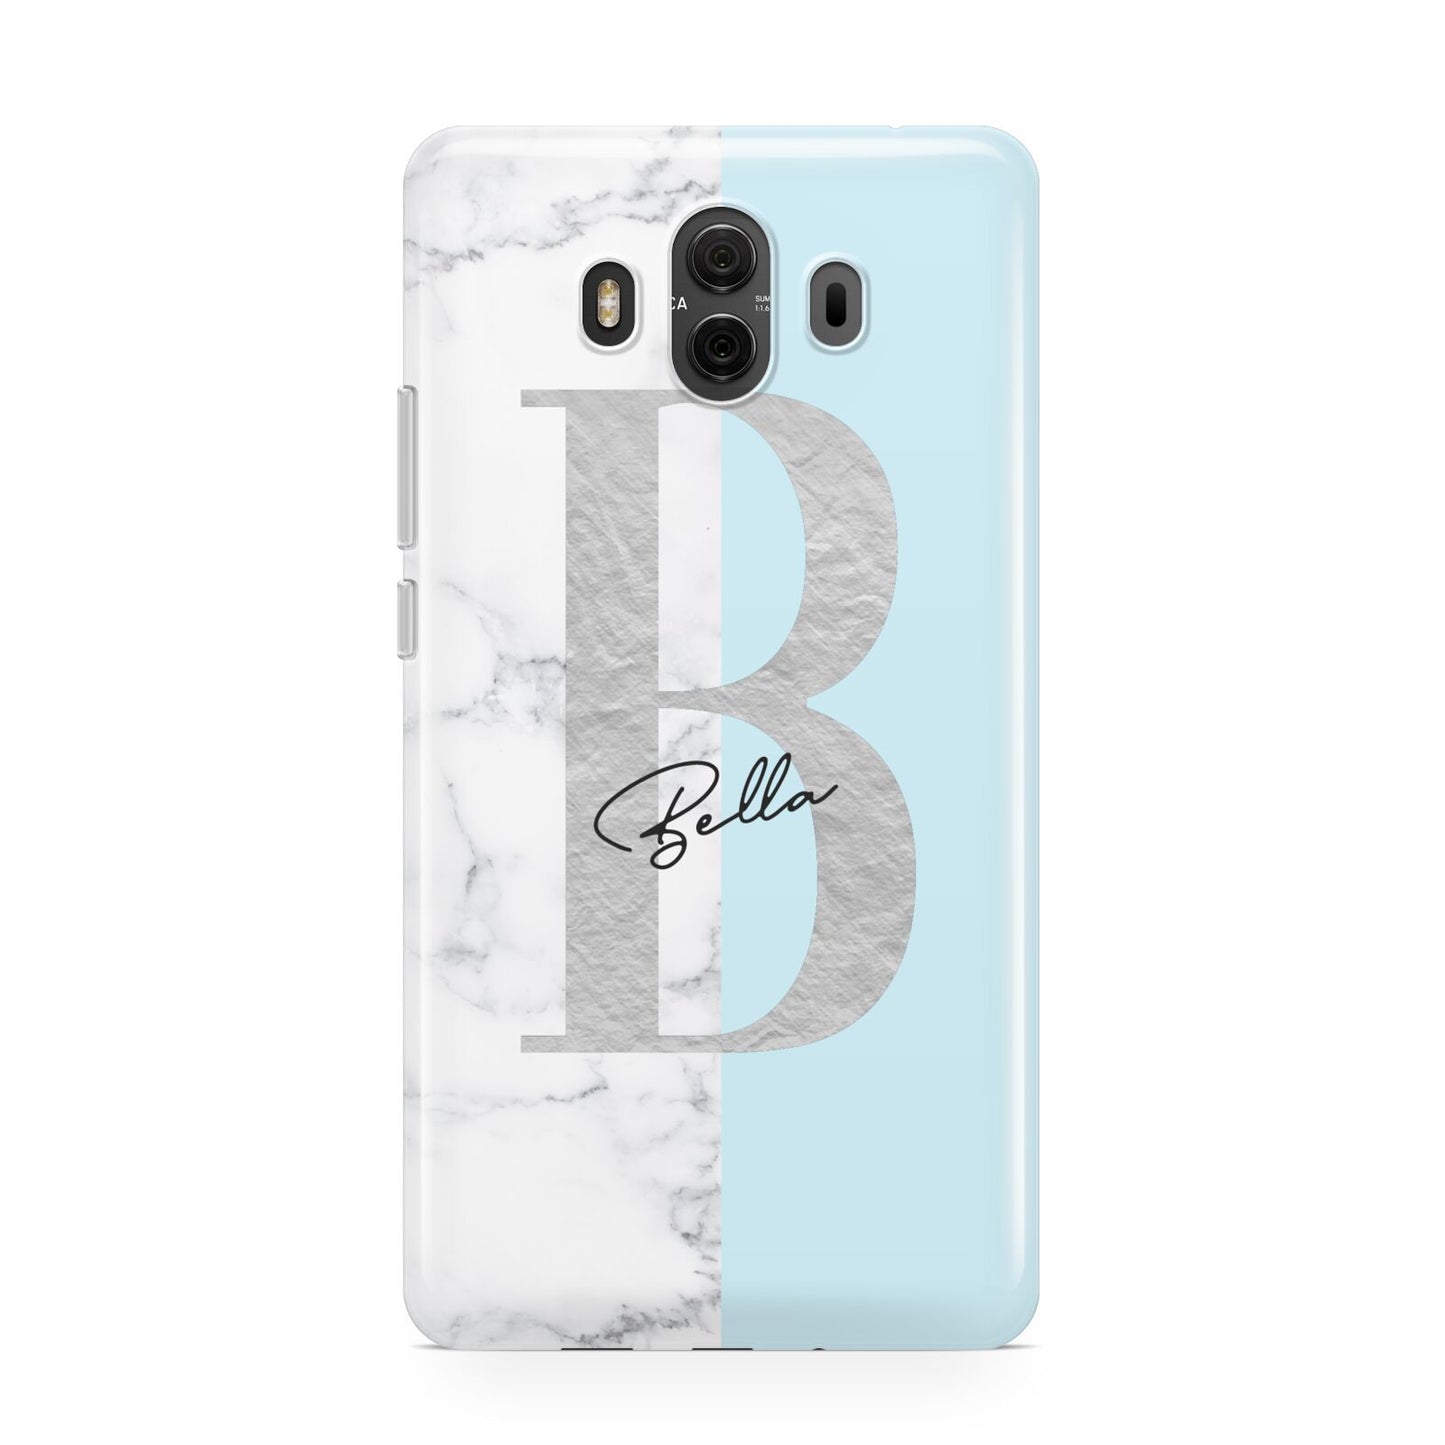 Personalised Chrome Marble Huawei Mate 10 Protective Phone Case